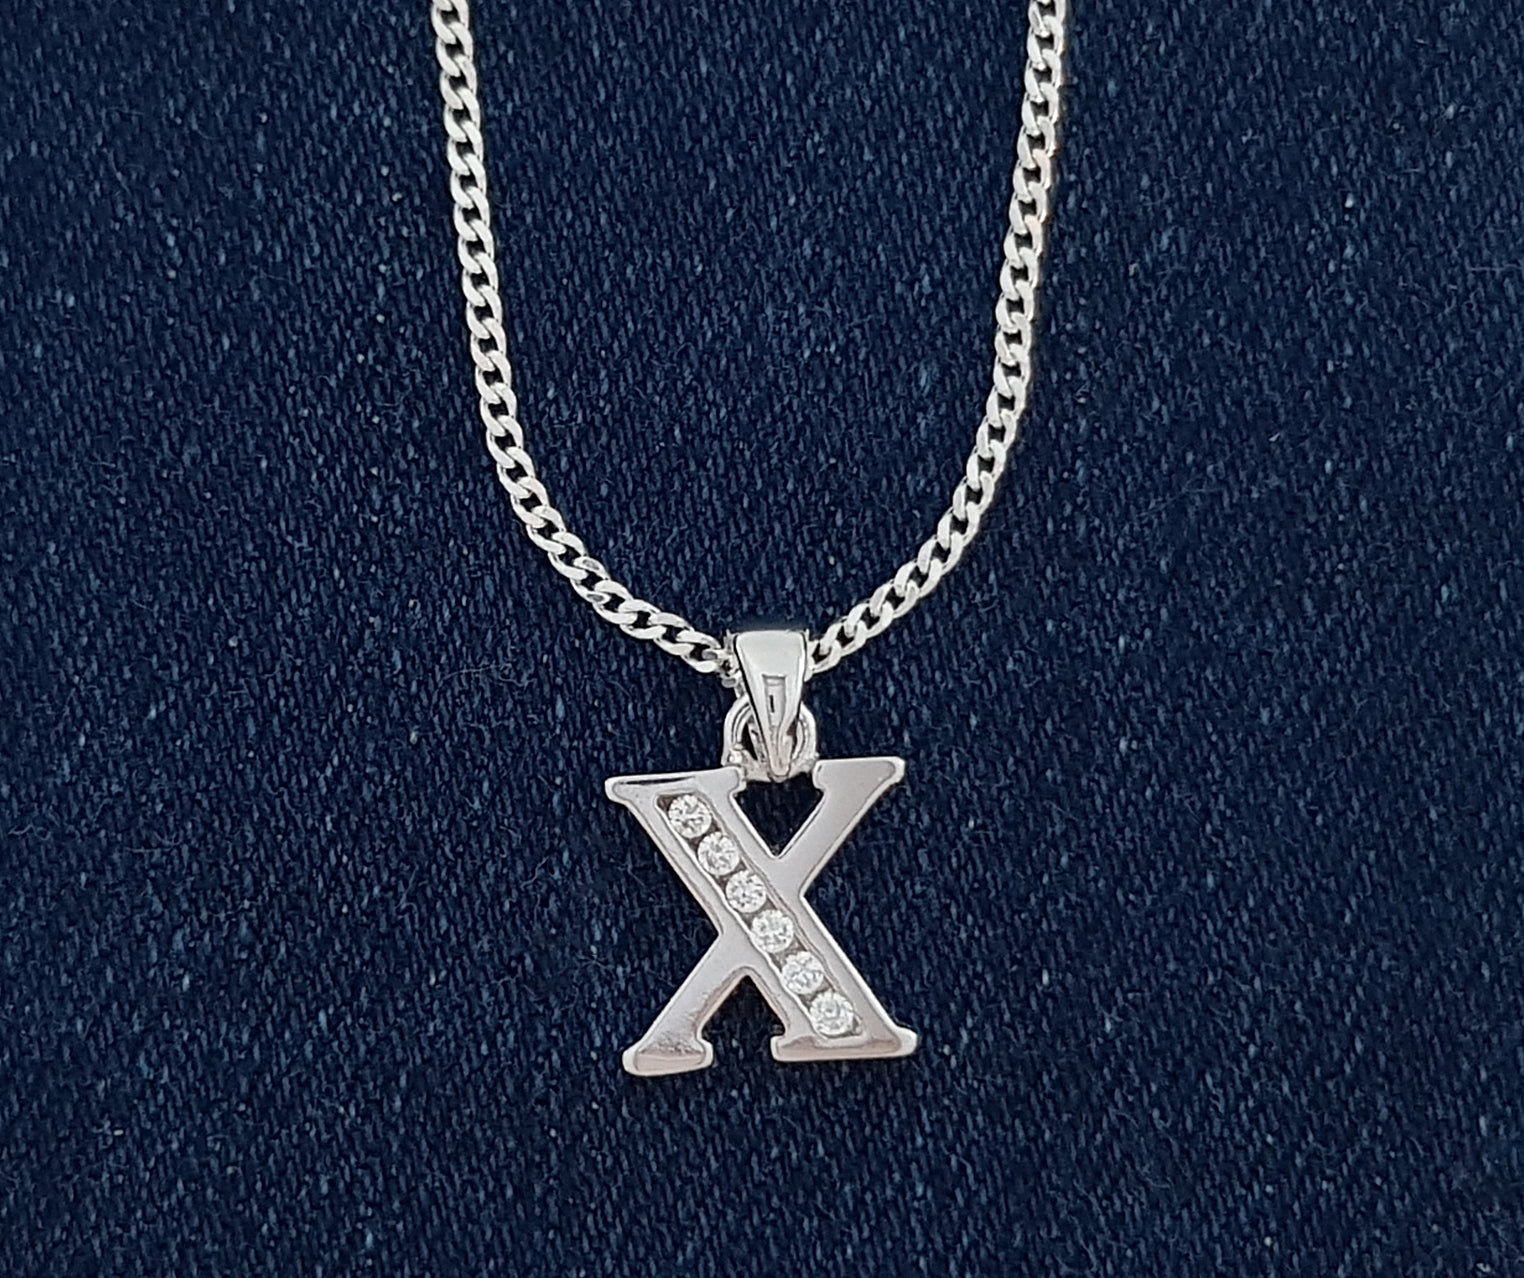 Sterling Silver Initial with Cubic Zirconia Stones- "X" Initial or Letter